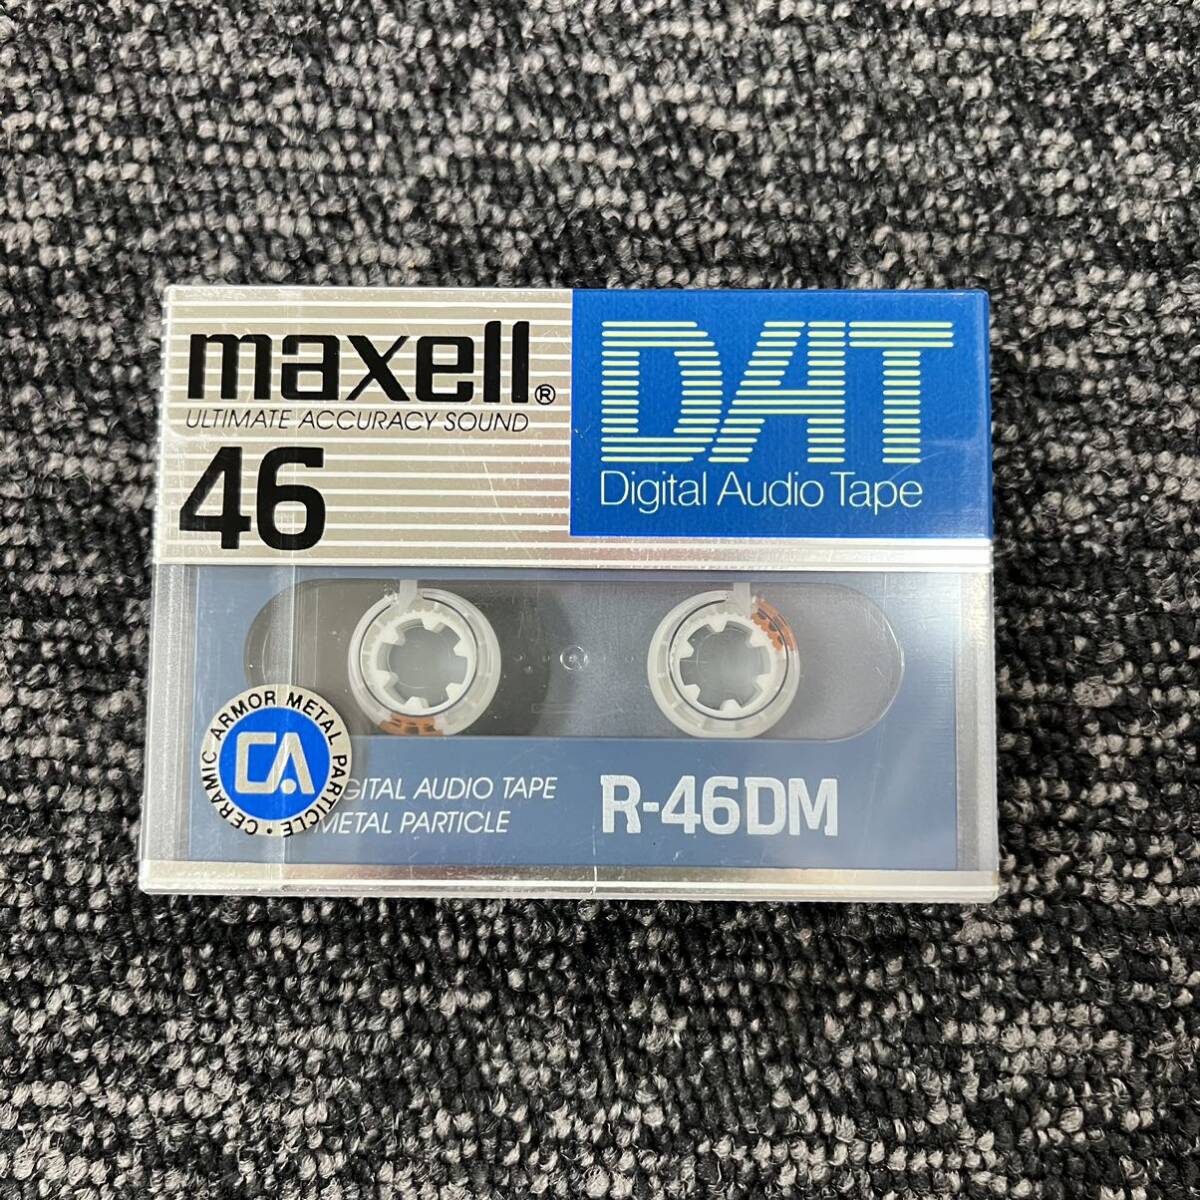  new goods cassette tape * cleaning cassette together 4 pcs set / maxell ULTIMATE ACCURACY SOUND 46 / DAT Digital Audio Tape